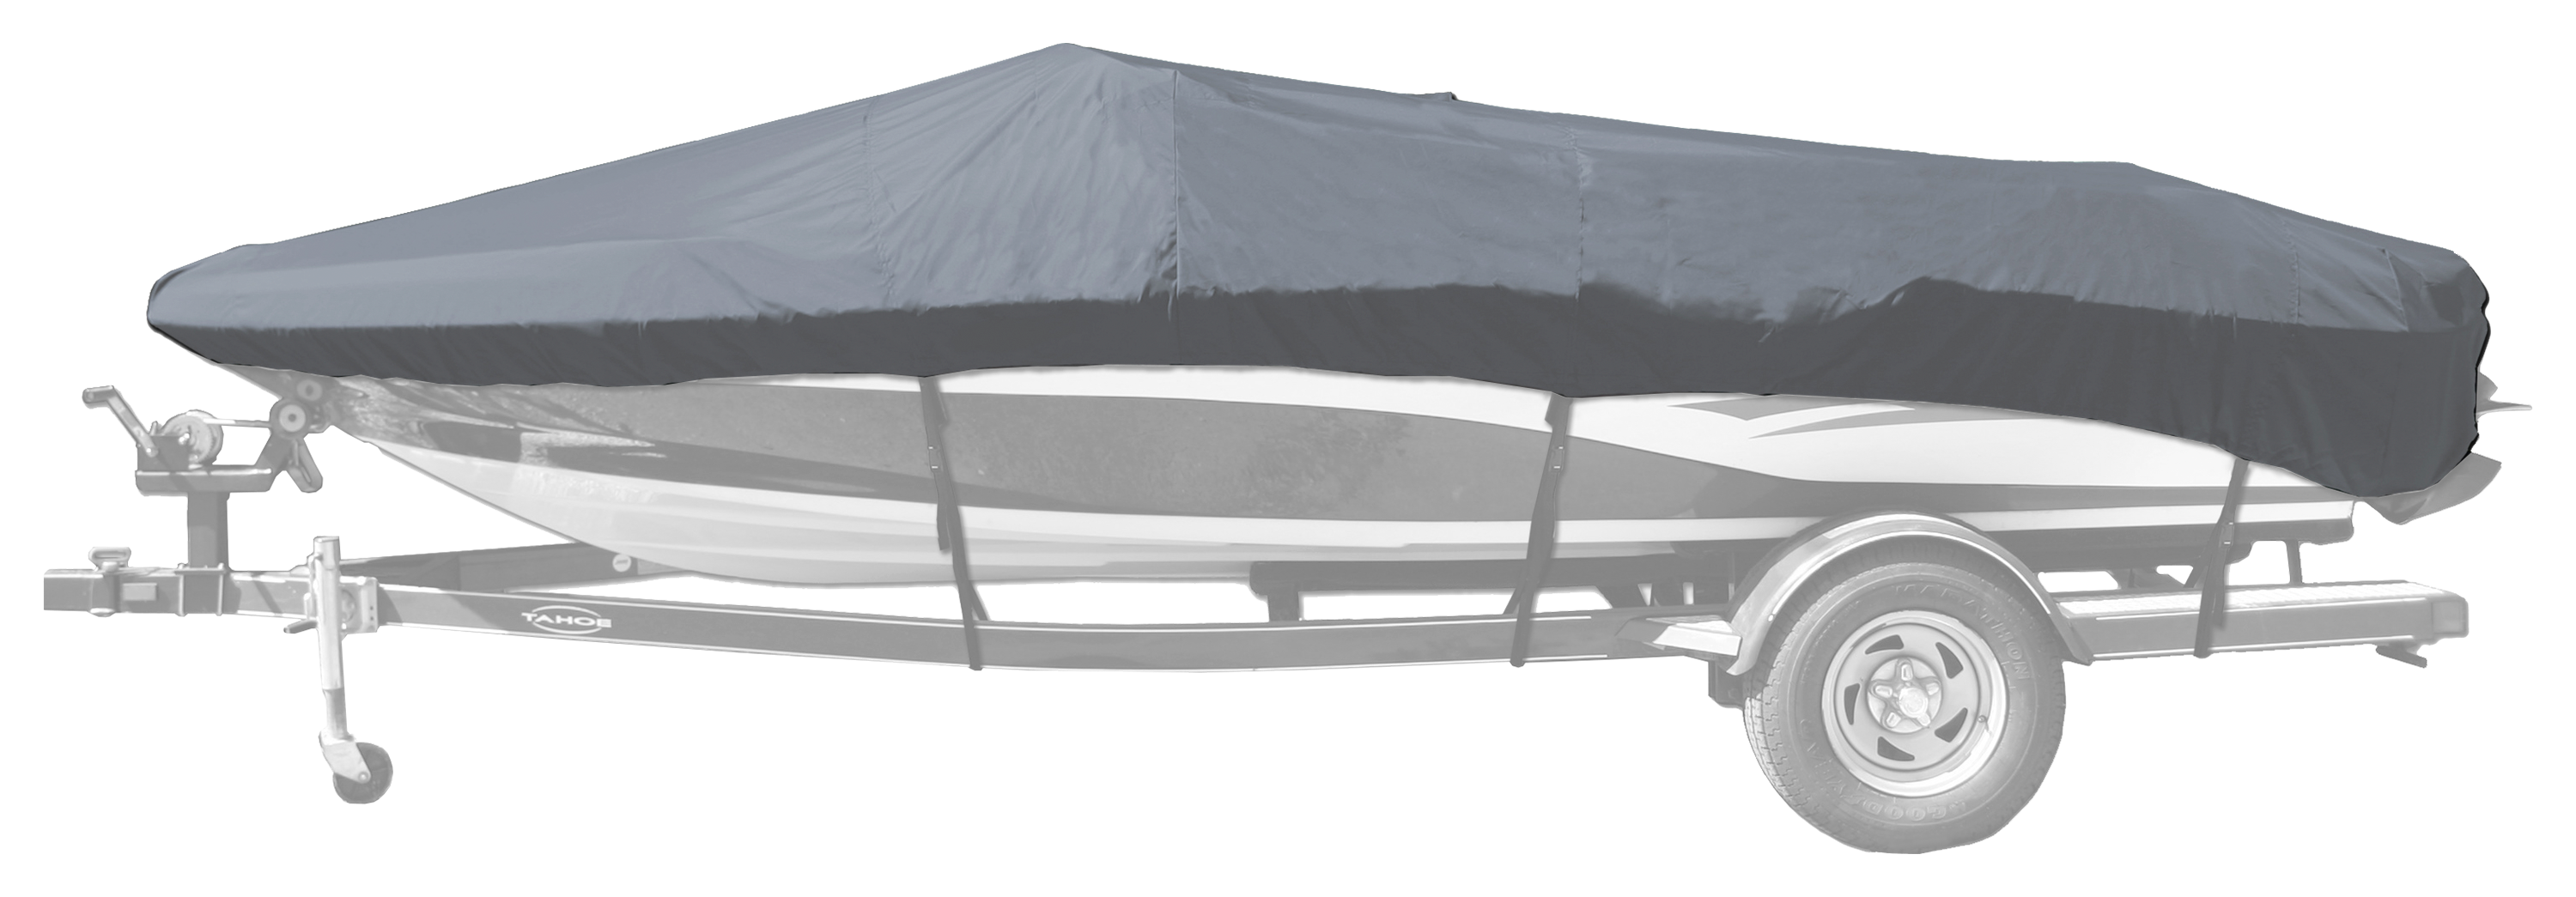 Bass Pro Shops Select Fit Hurricane Boat Cover by Westland for Euro V-Hull Runabout I/O Model